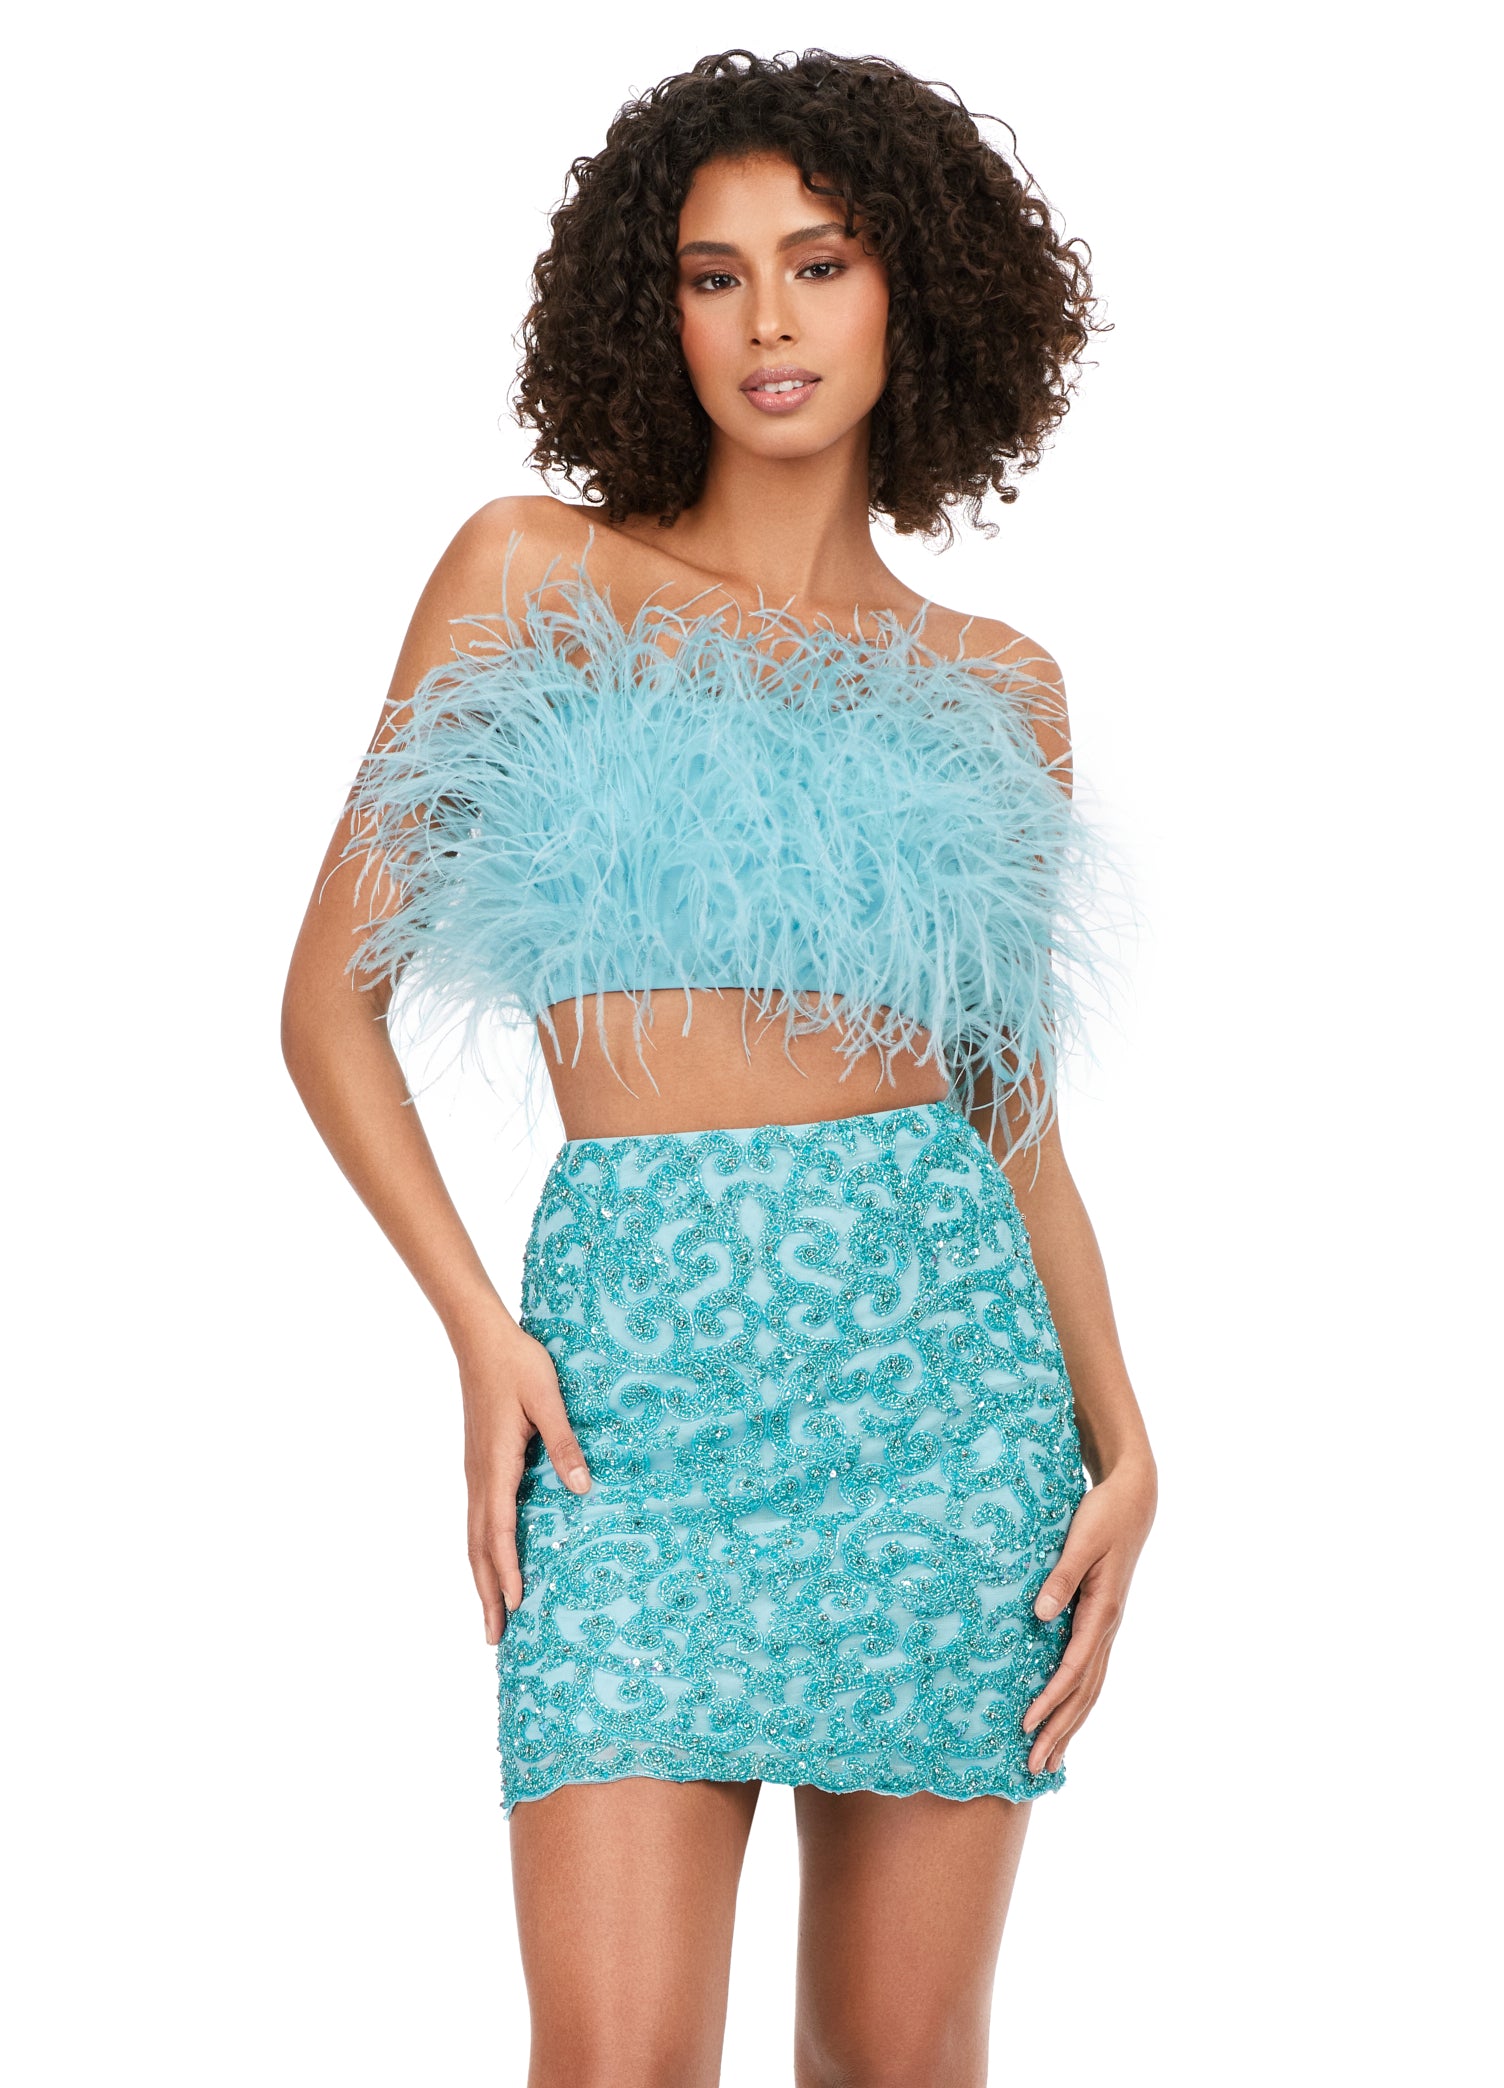 Ashley Lauren 4599 Short Two Piece Beaded Skirt Feather Bodice Formal  Cocktail Dress